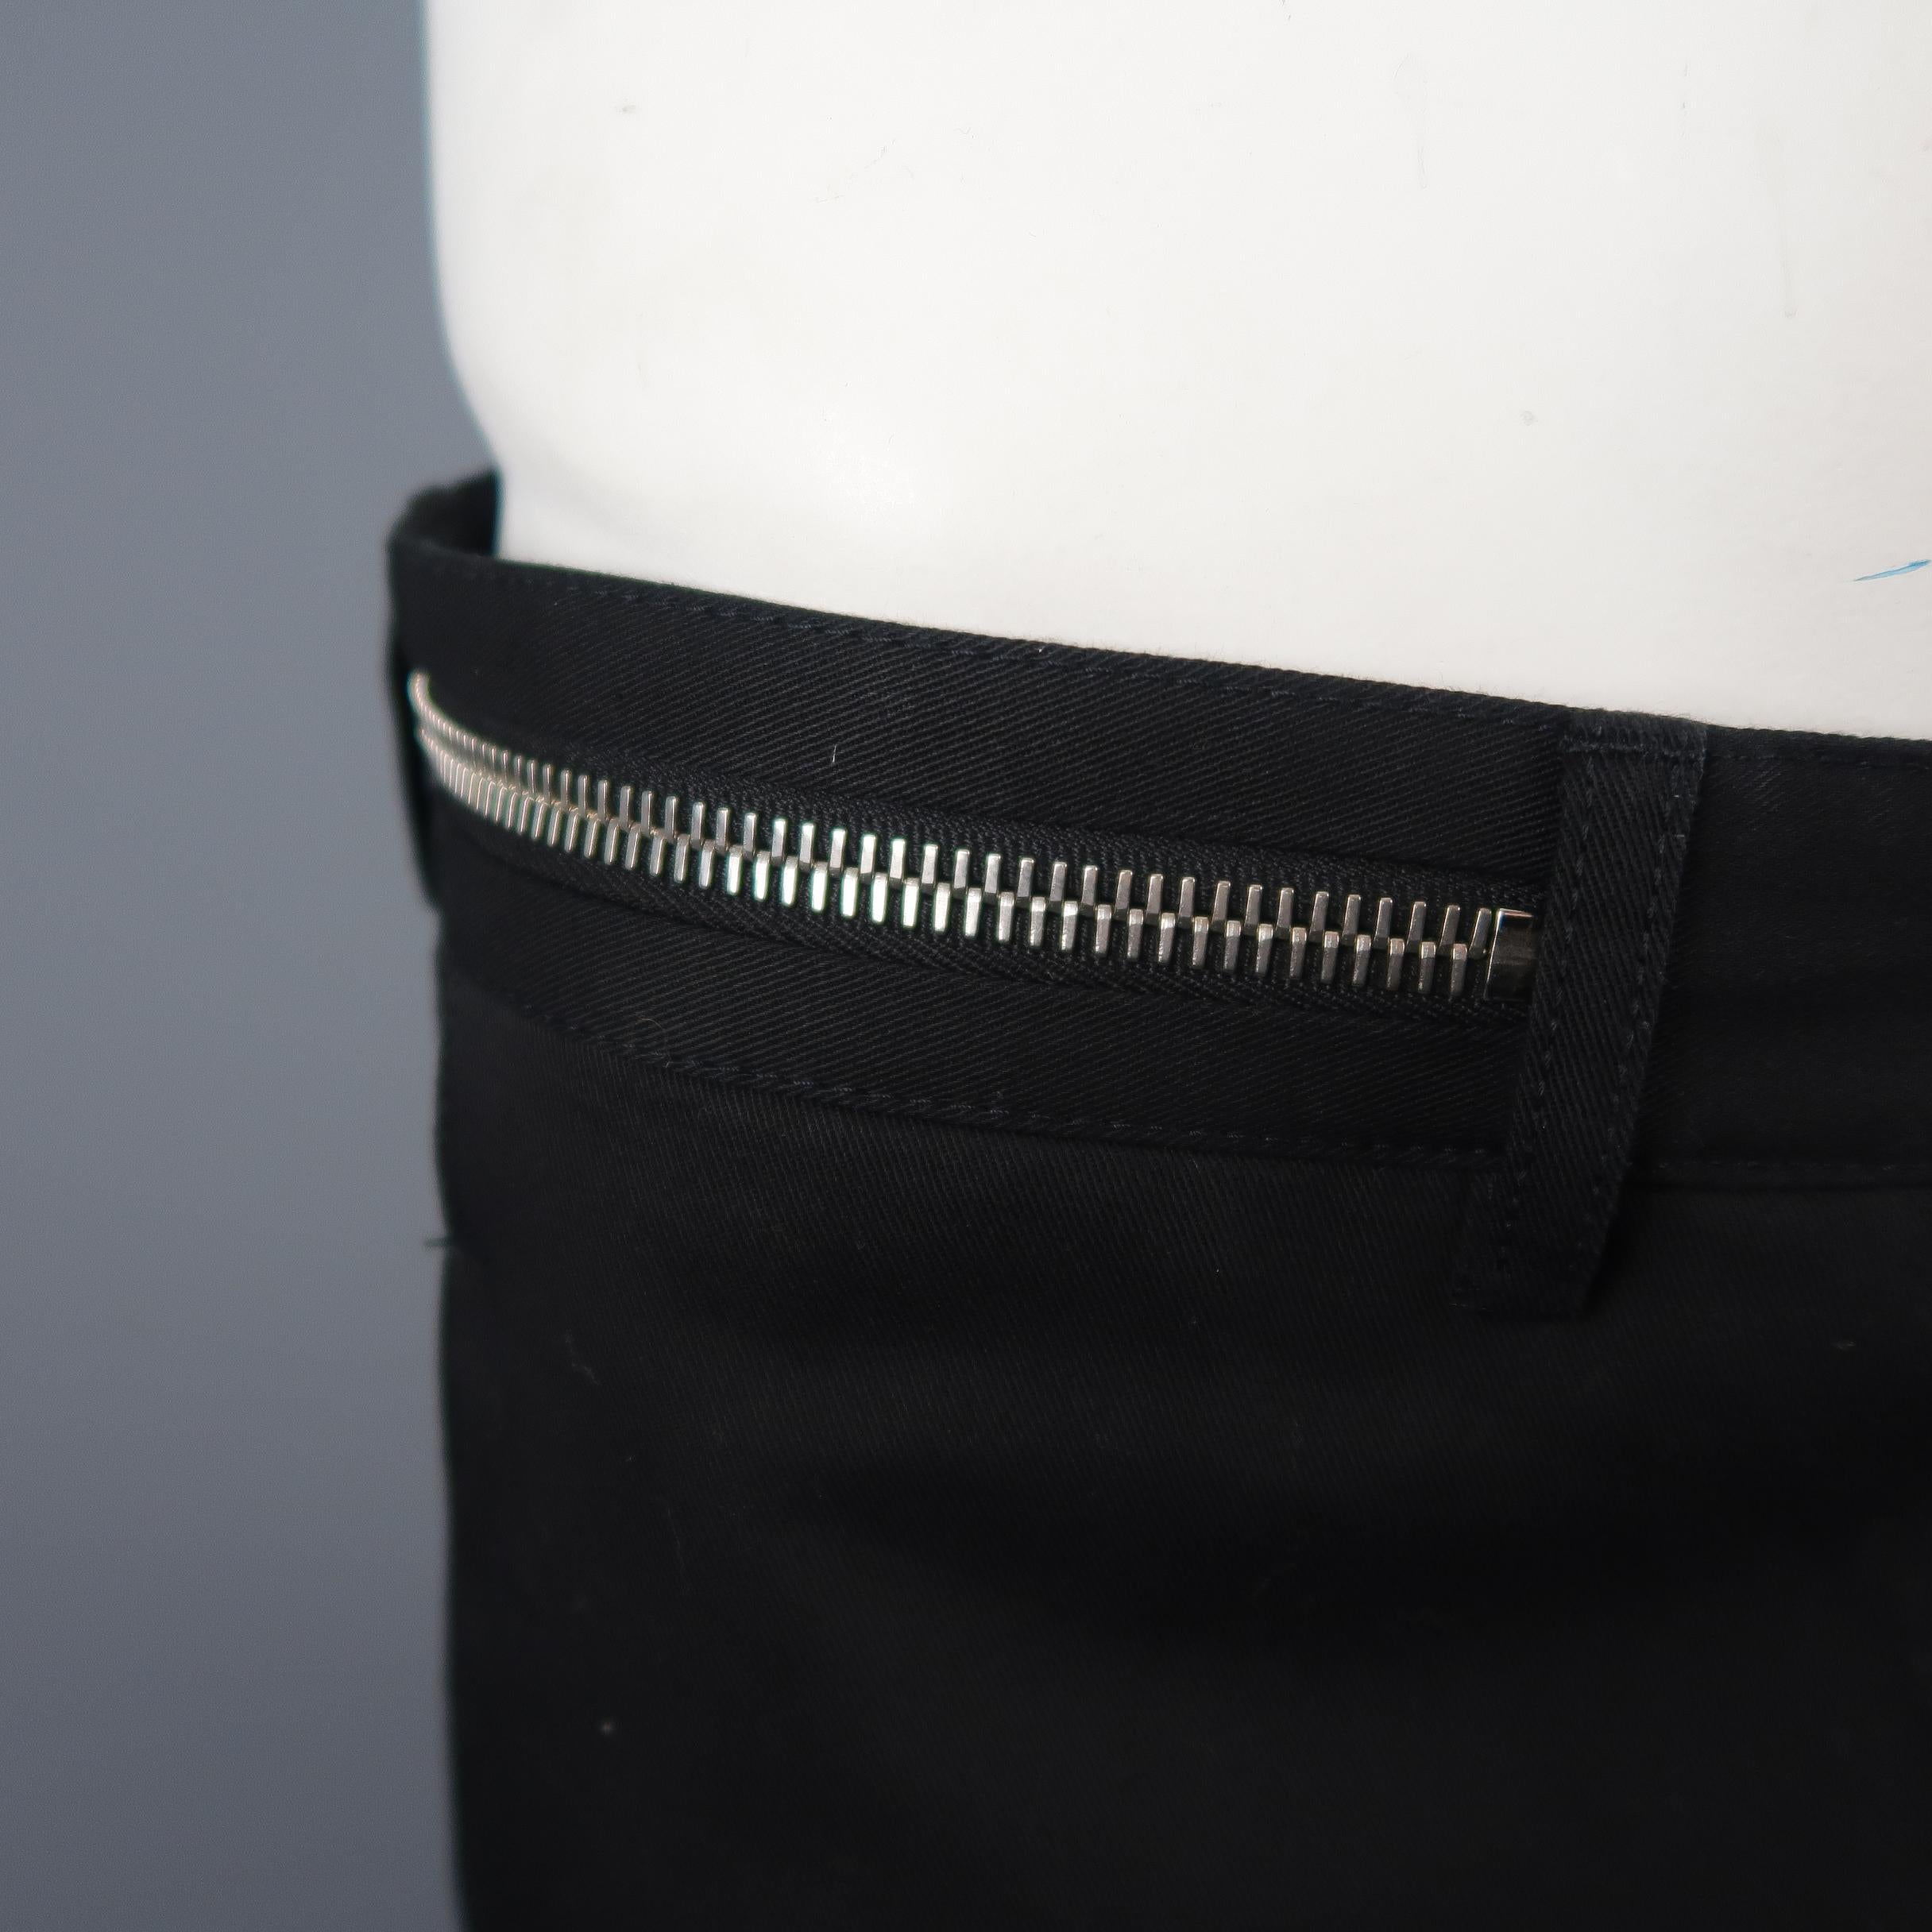 GIVENCHY by RICCARDO TISCI pants comes in black cotton twill with a tapered leg, silver tone zipper detailed waistband, and signature cross stitched back.
 
Excellent Pre-Owned Condition.
Marked: IT 52
 
Measurements:
 
Waist: 36 in.
Rise: 10